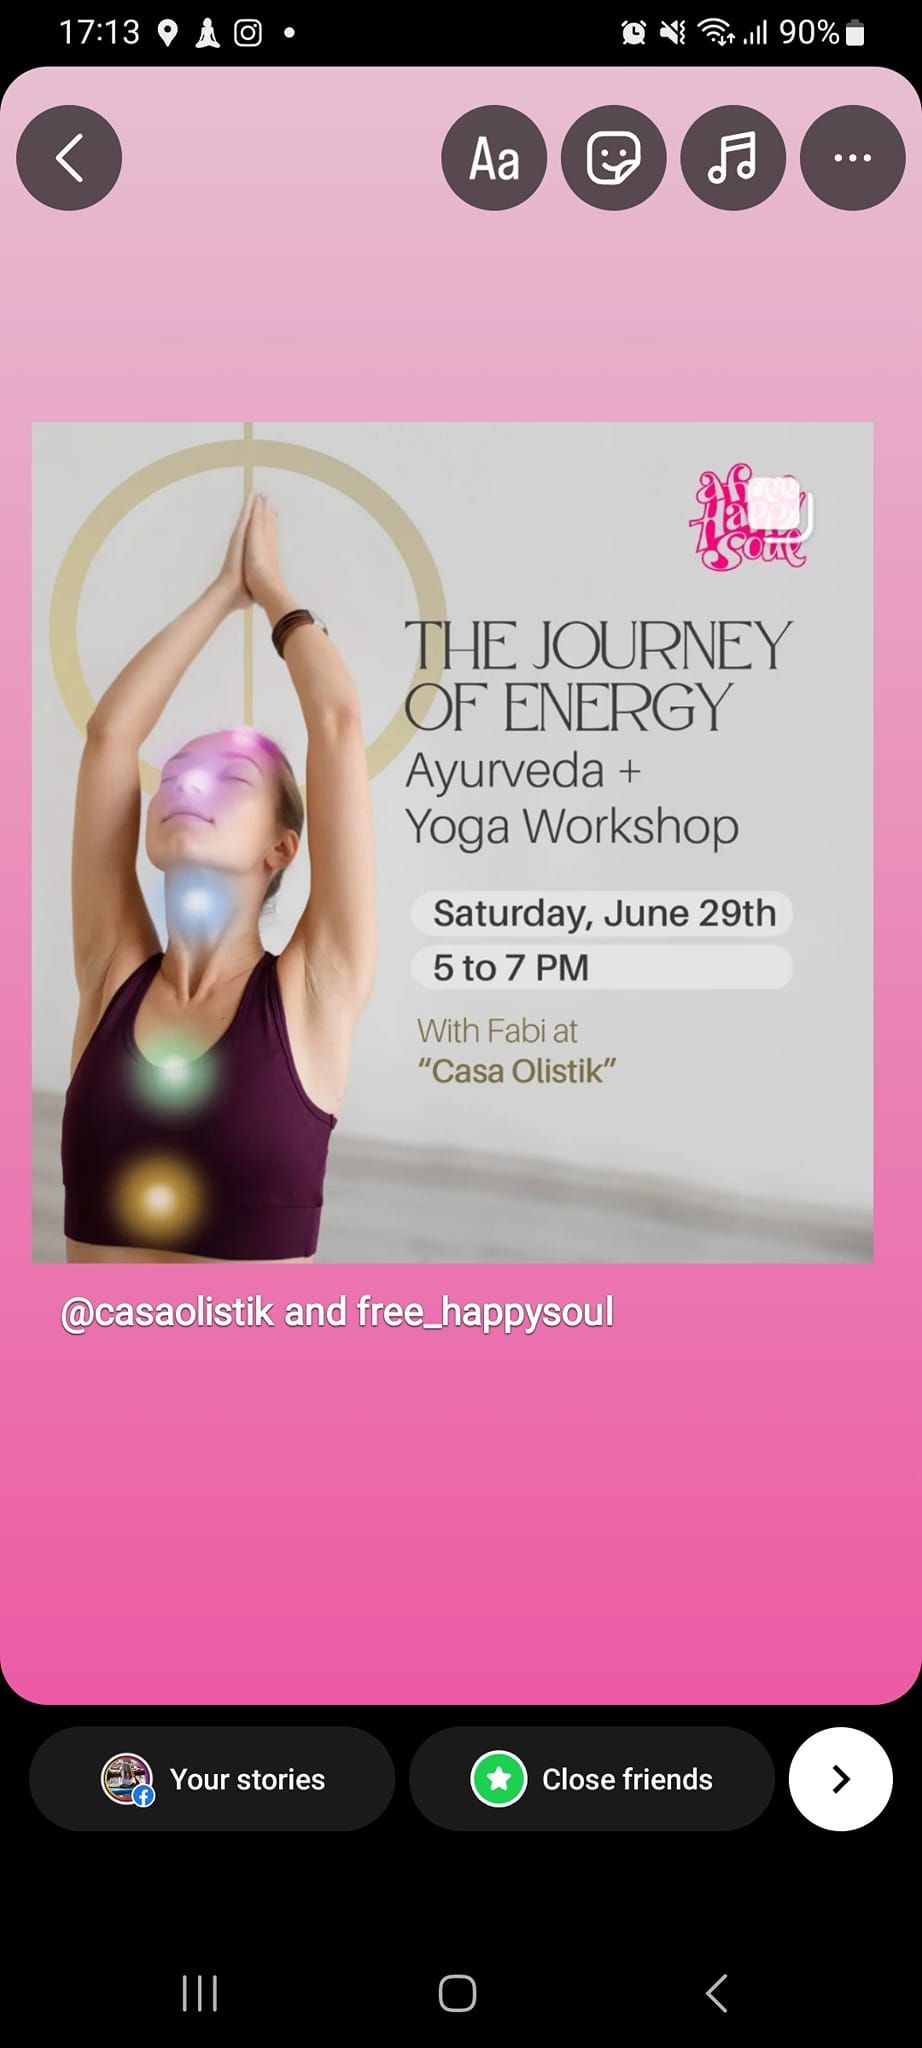 The energy journey workshop in Palma - yoga and ayurveda